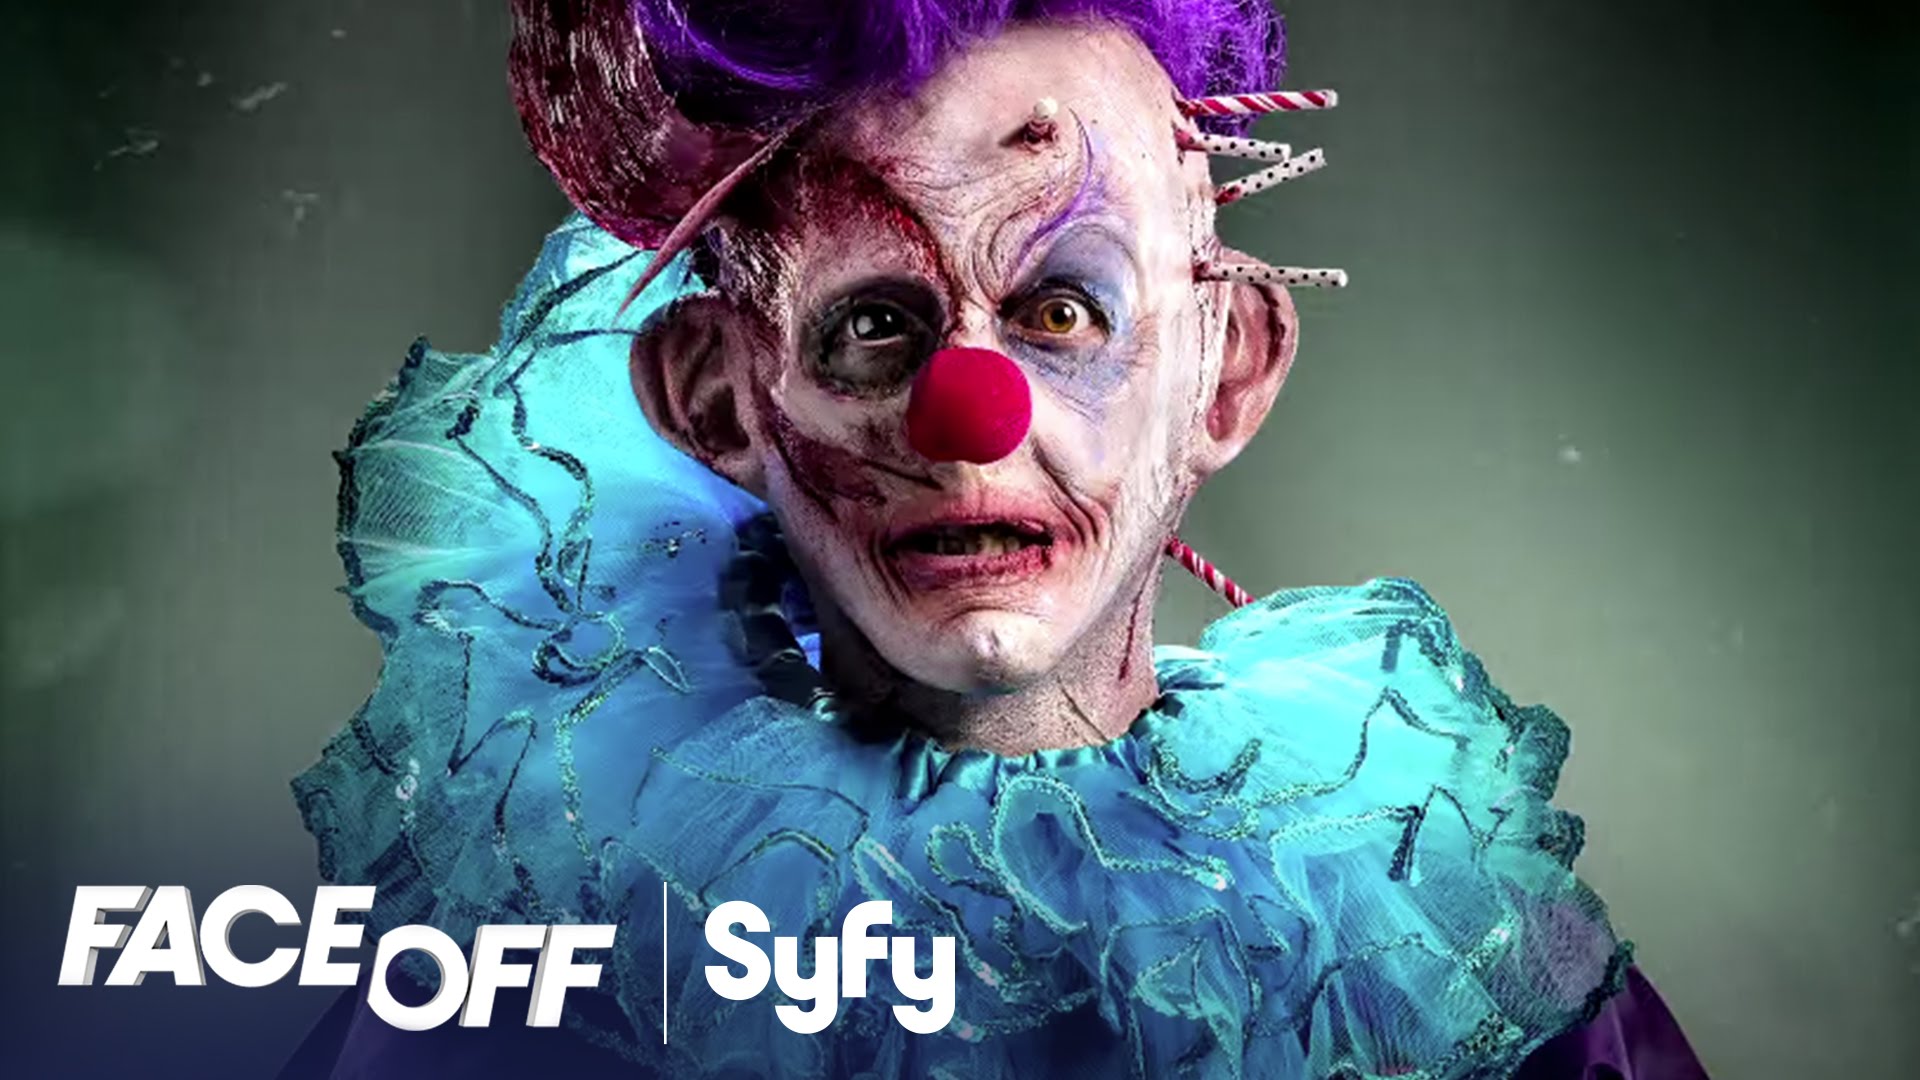 Face Off TV show on Syfy.